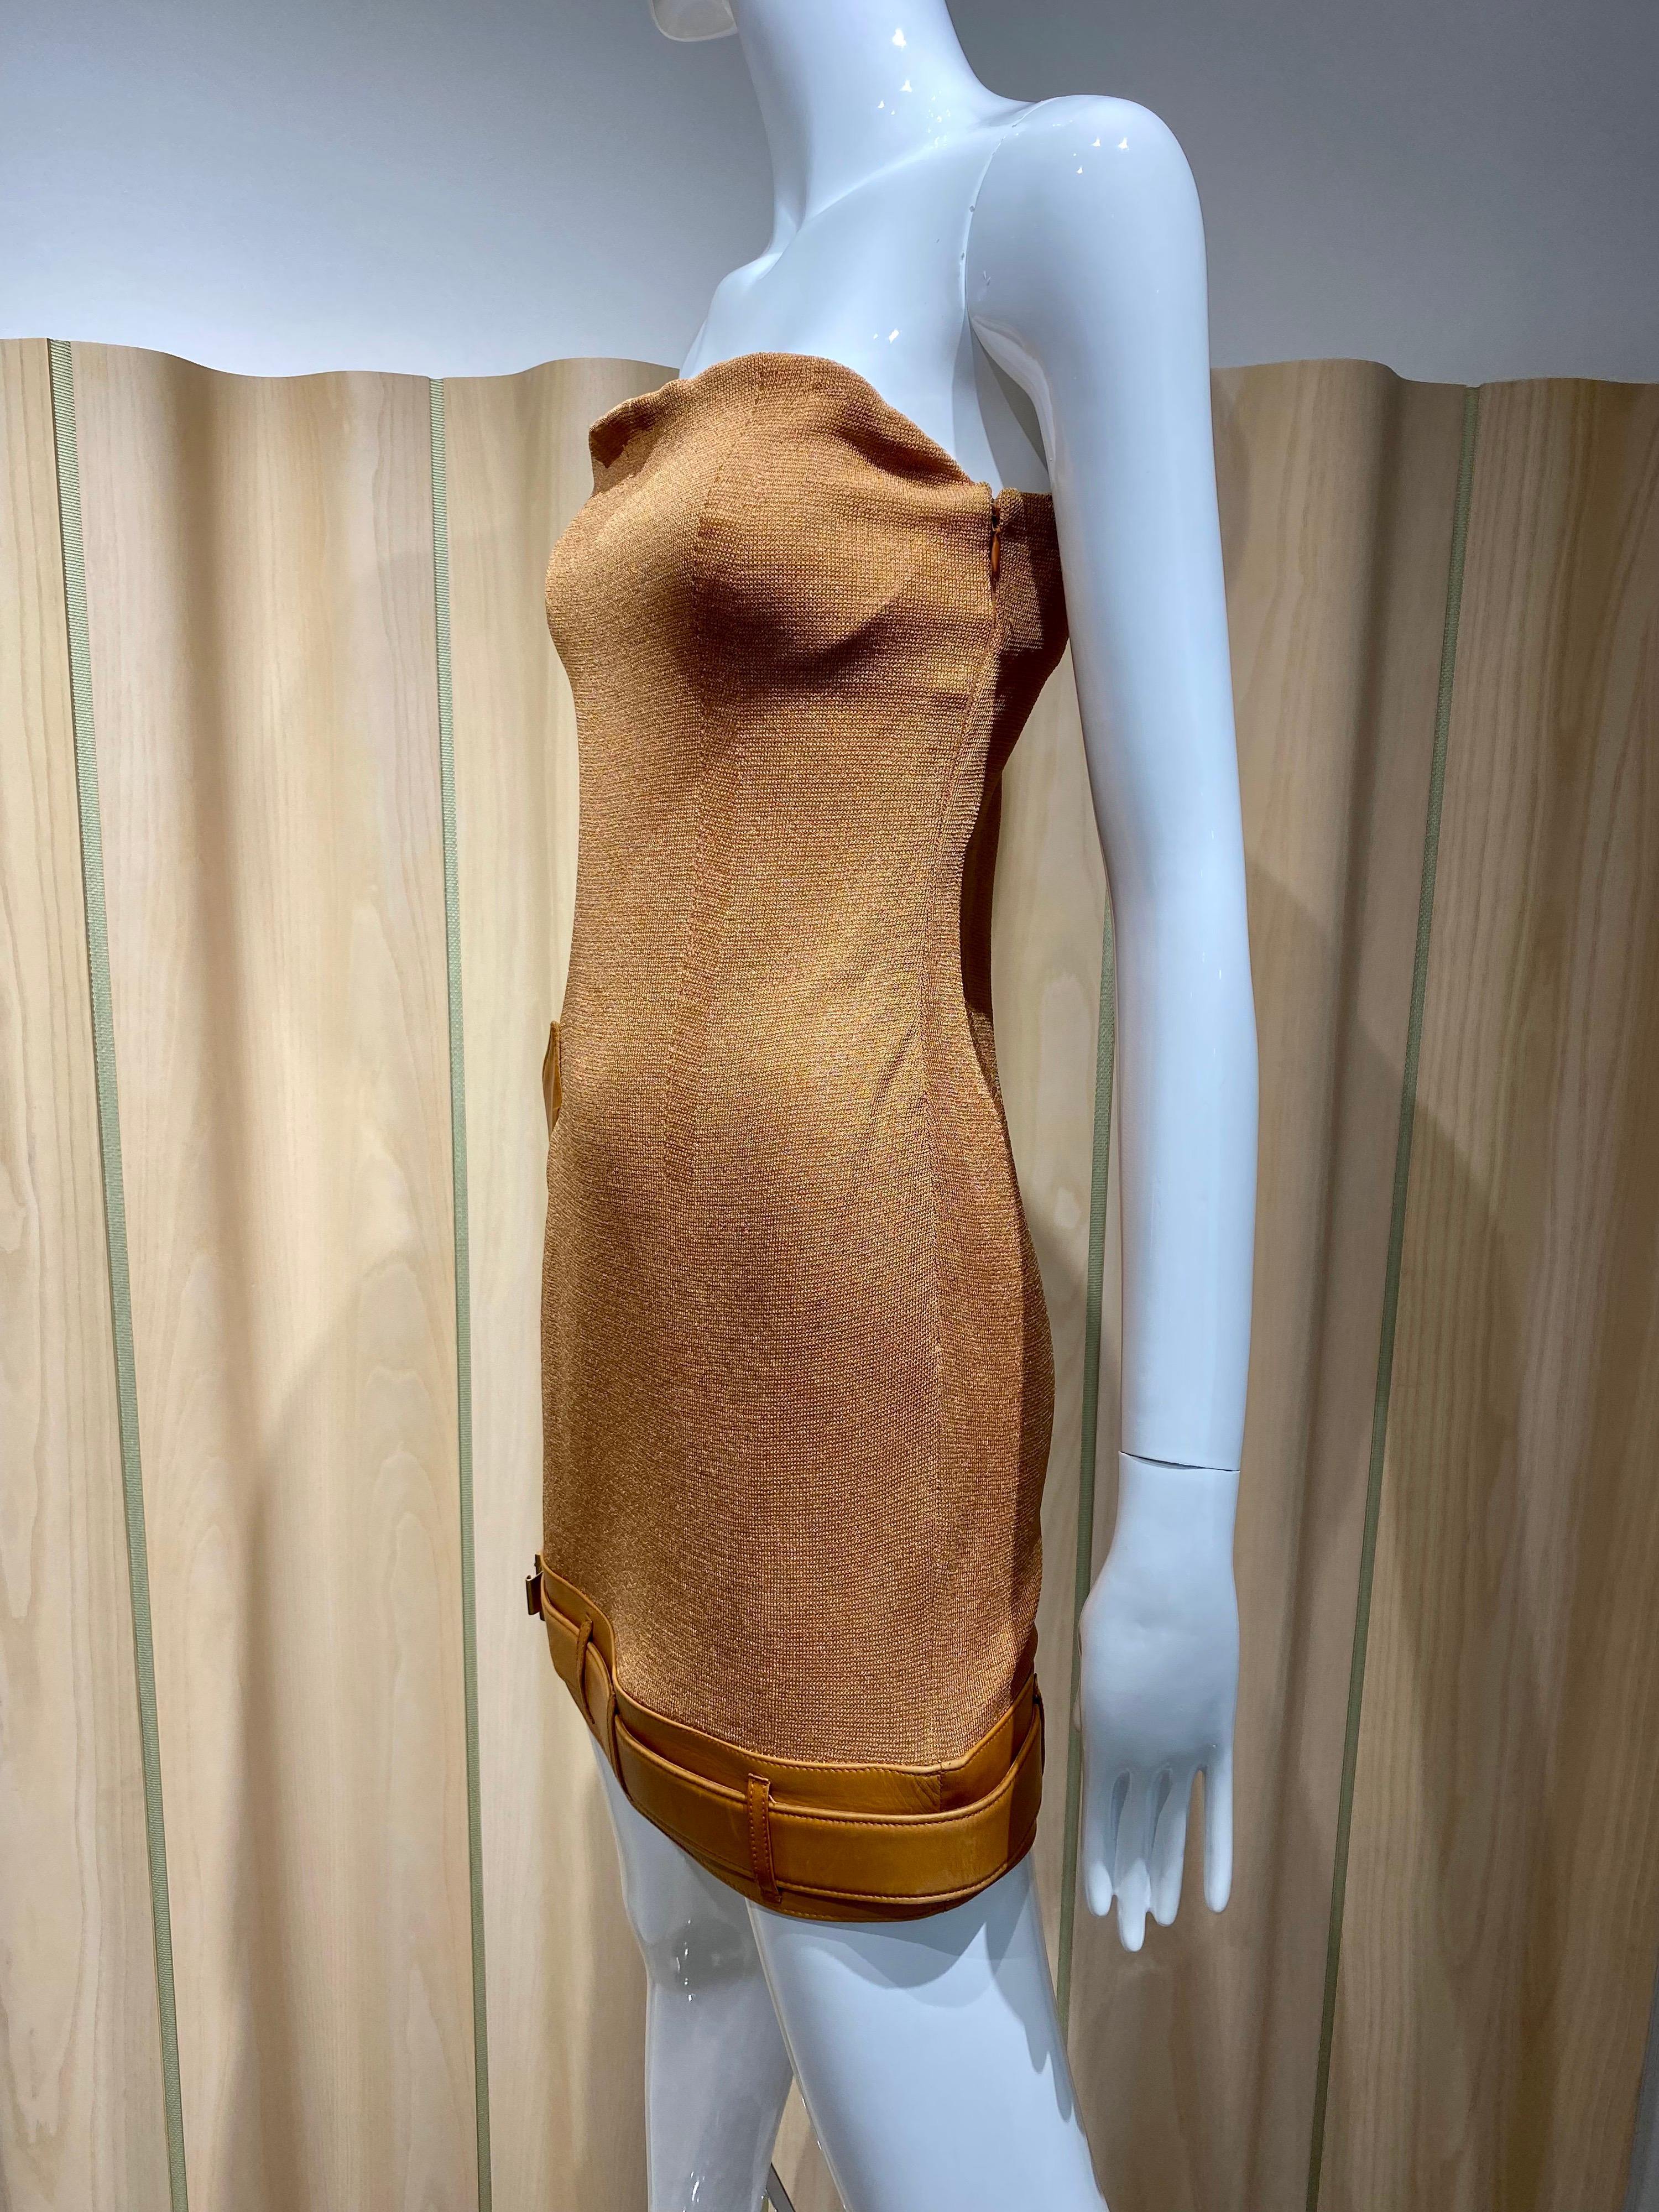 Vintage Gianfranco Ferre Light Brown Knit   mini strapless dress with leather trimming.
Dress has built in bra.  Perfect for cocktail party.

Size : Small
Bust : 32” / Waist : 28” / Hip :34”/ Dress Length ; 27”